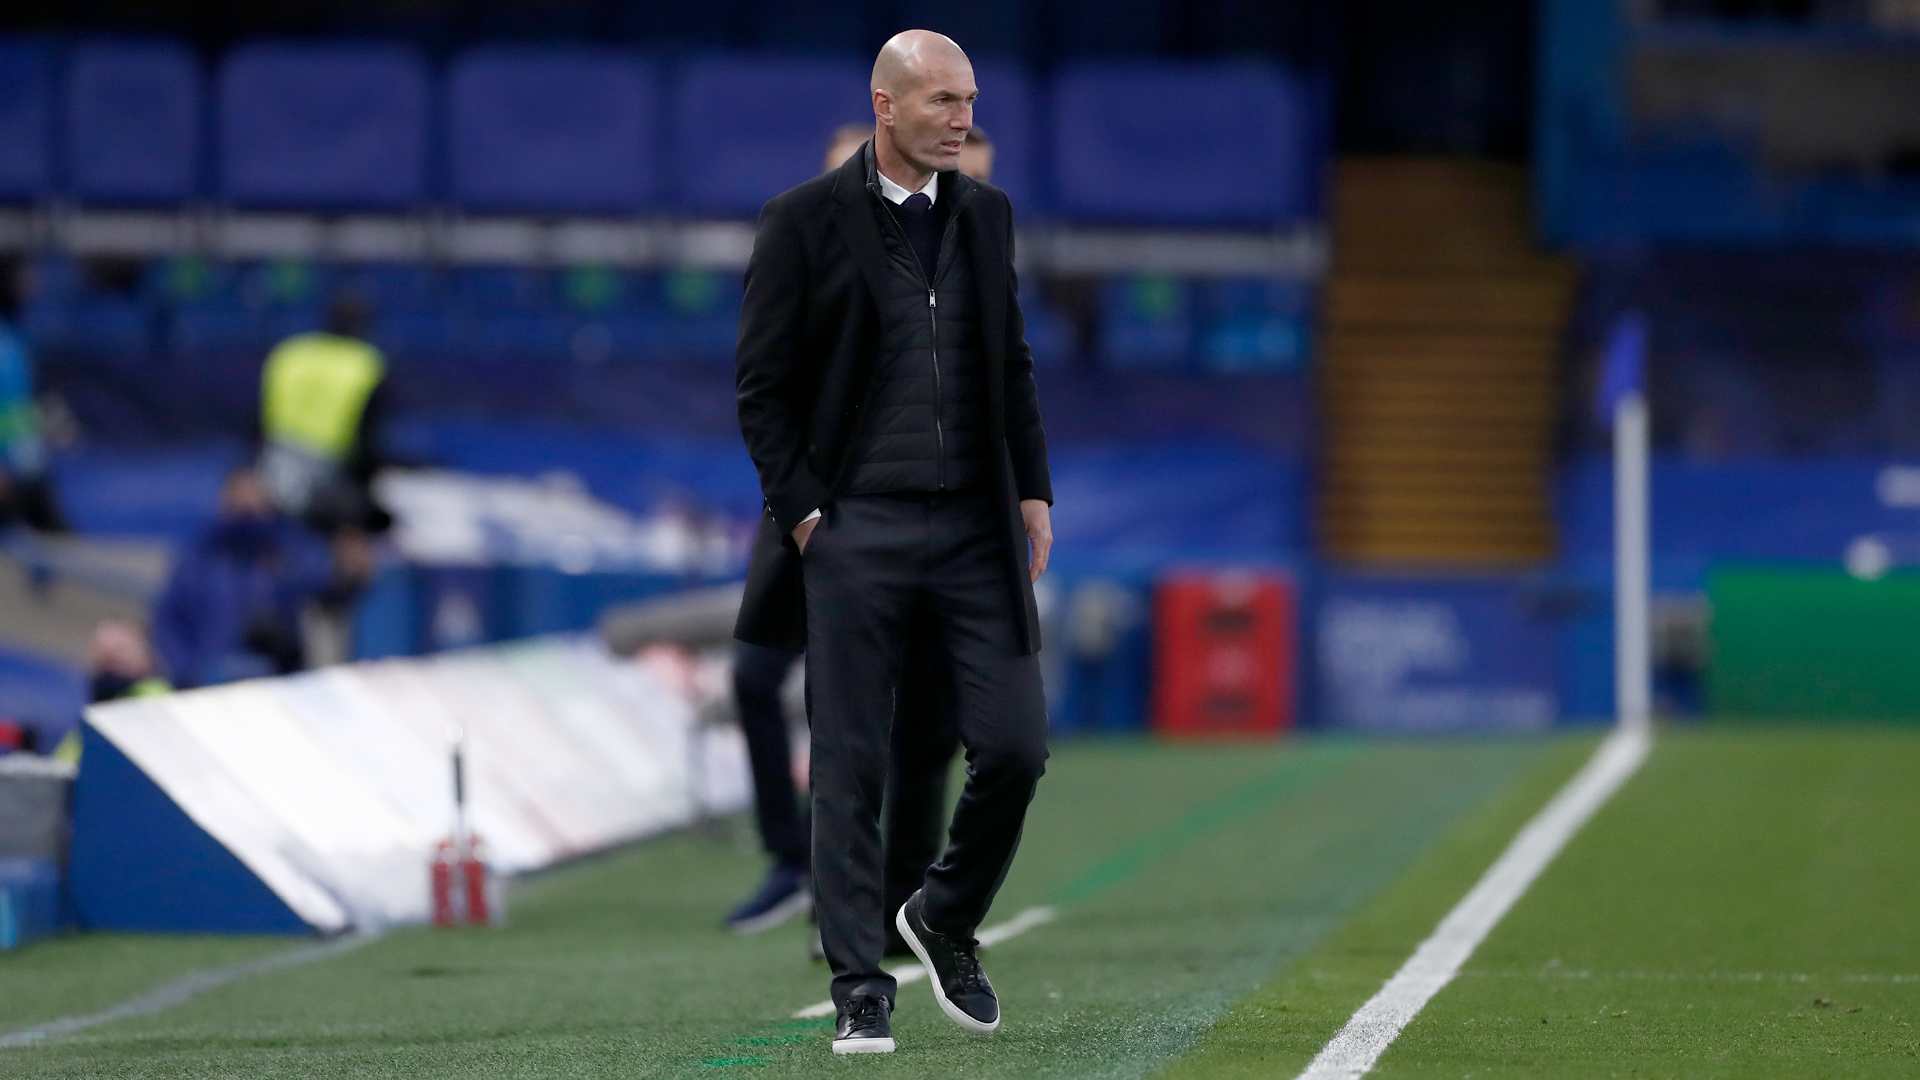 Zinedine Zidane will be under immense pressure, following constant speculation over his future. (Image Credit: Twitter/@realmadrid)